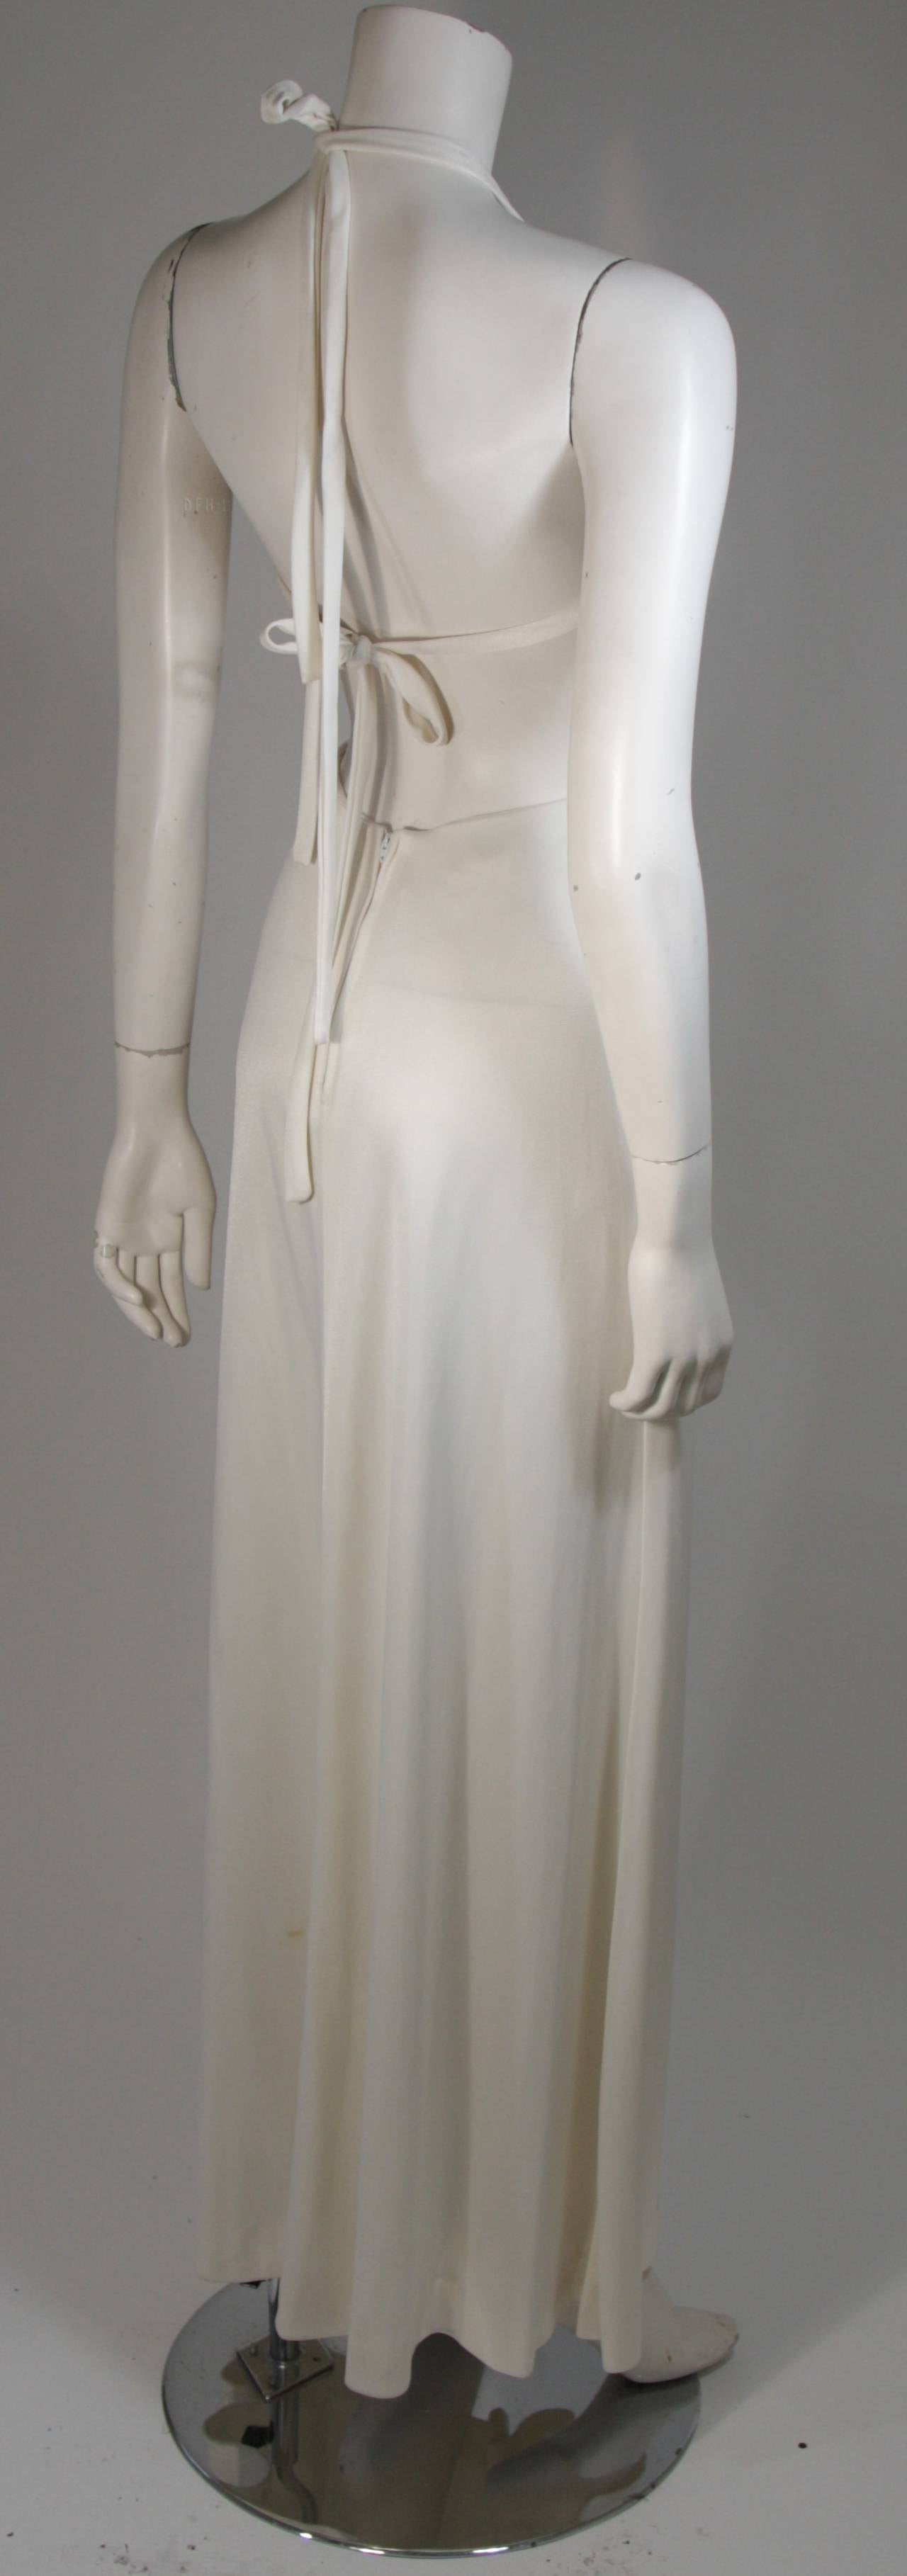 Funky 1970's White Draped Jersey Gown with Exposed Sides Size Small 2